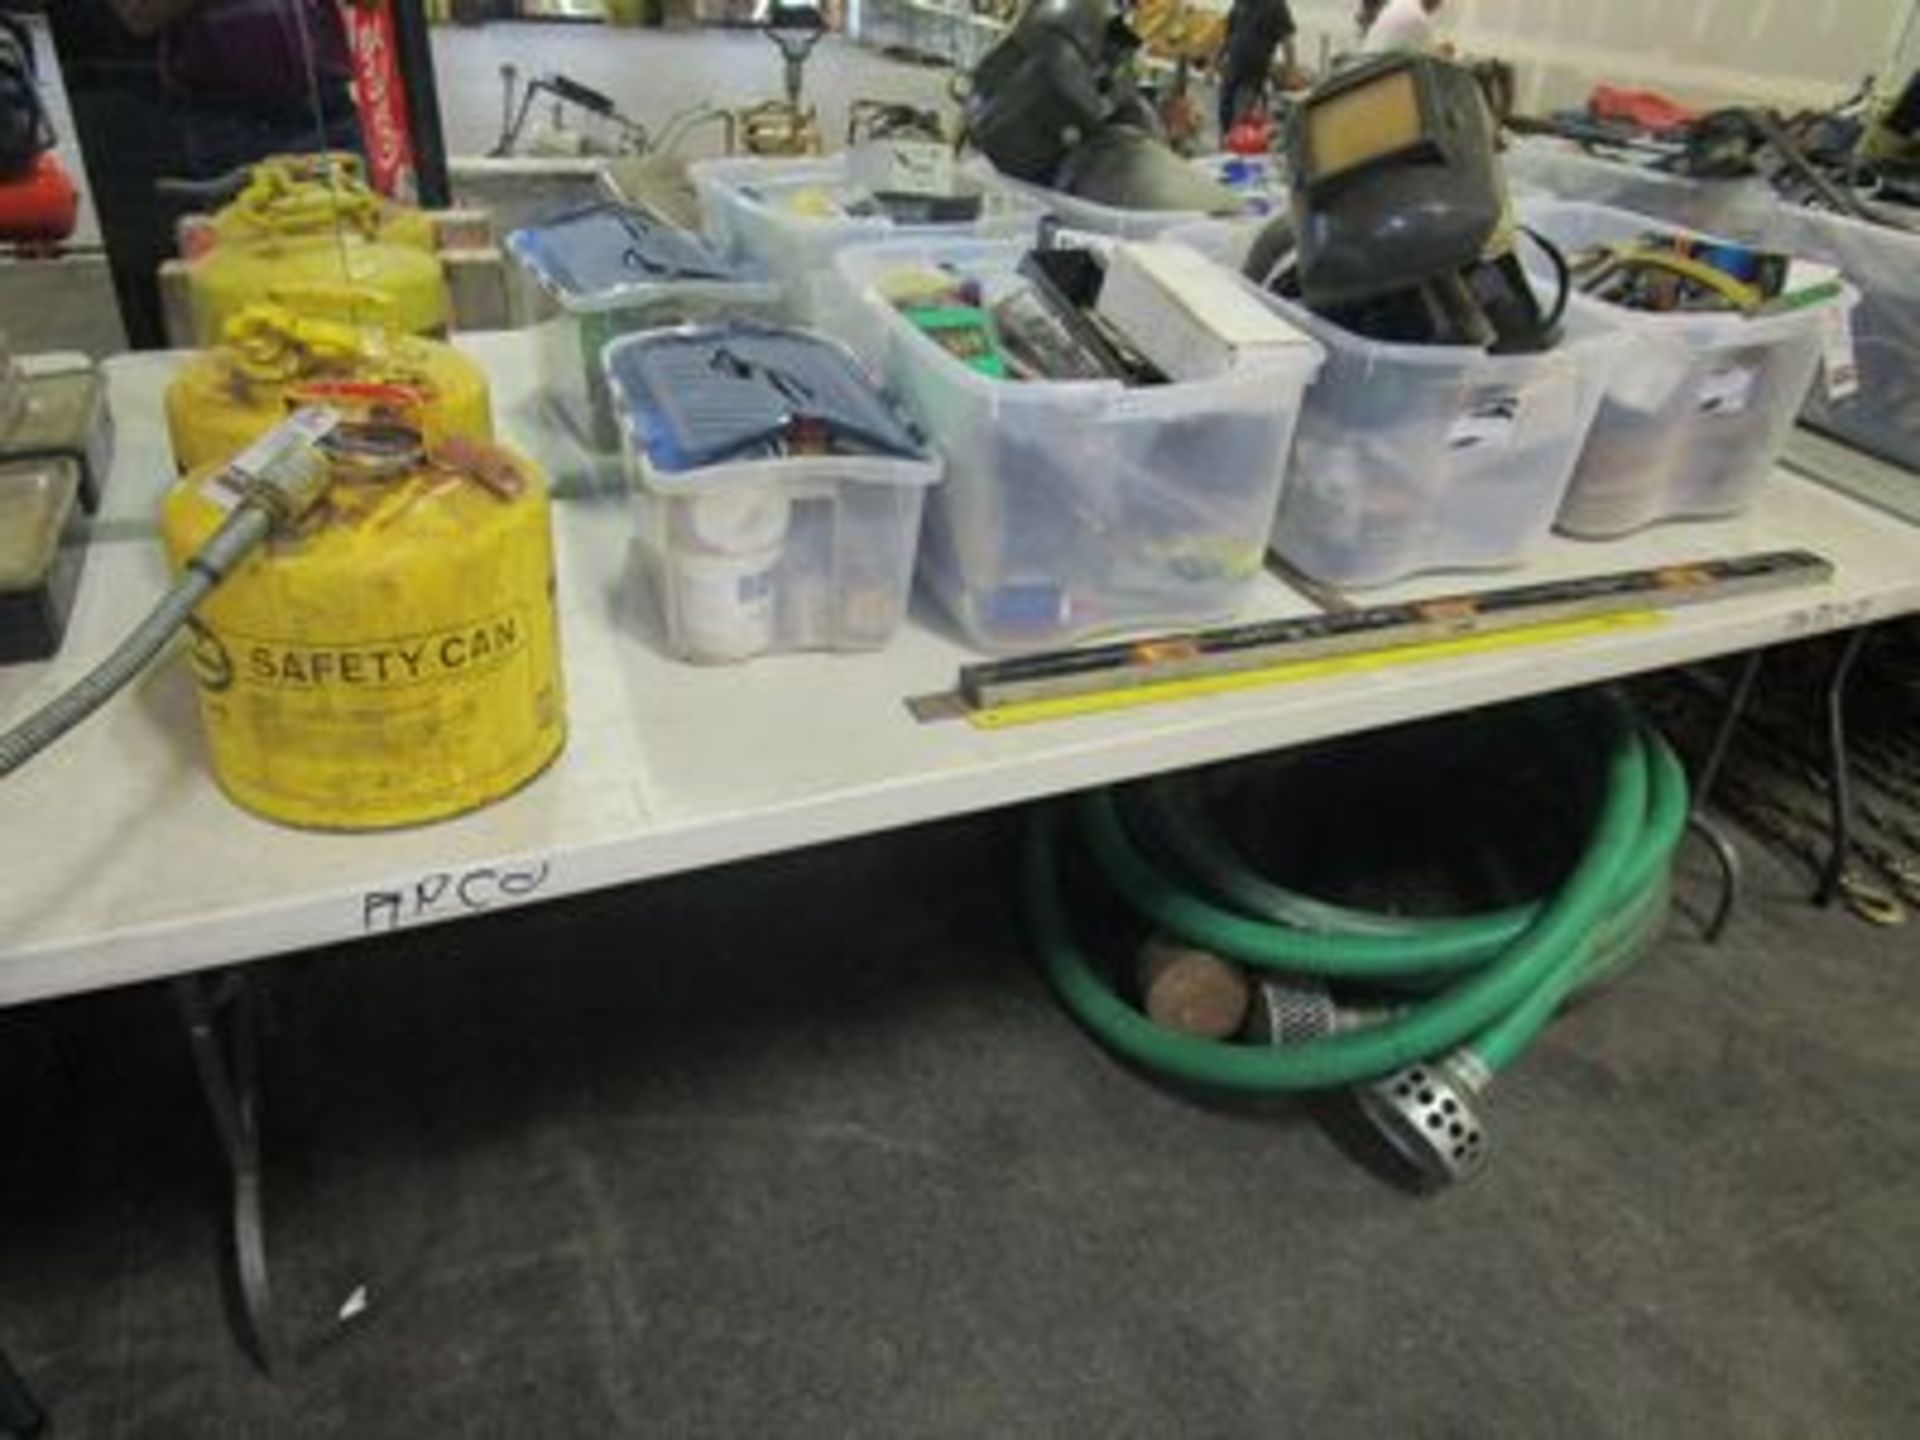 LOT OF ASS'T TOOLS, HOSE & MISC. ITEMS